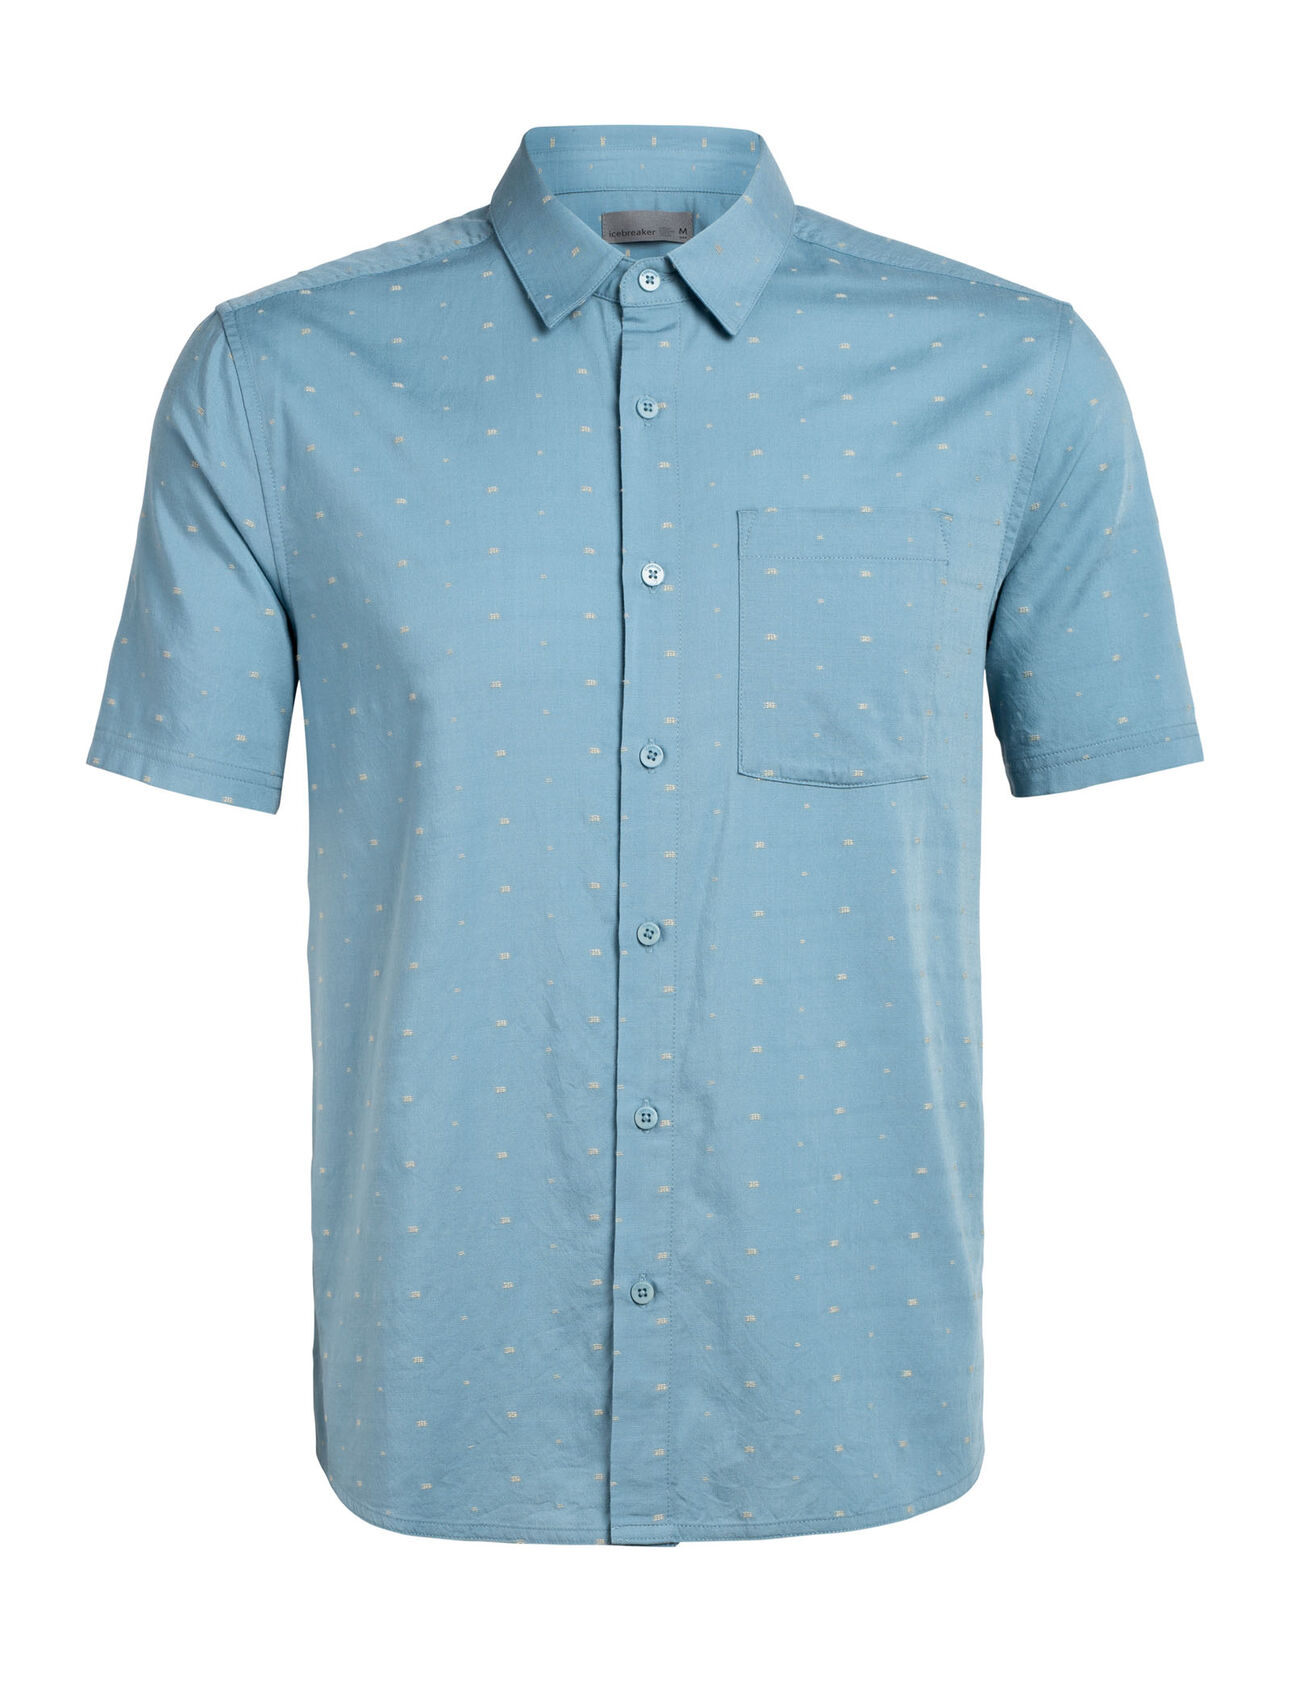 Mens Cool-Lite™ Merino Compass Short Sleeve Shirt A lightweight woven men’s merino wool shirt for travel or daily life, the Compass Flannel Short Sleeve Shirt combines classic style with modern natural fabrics.